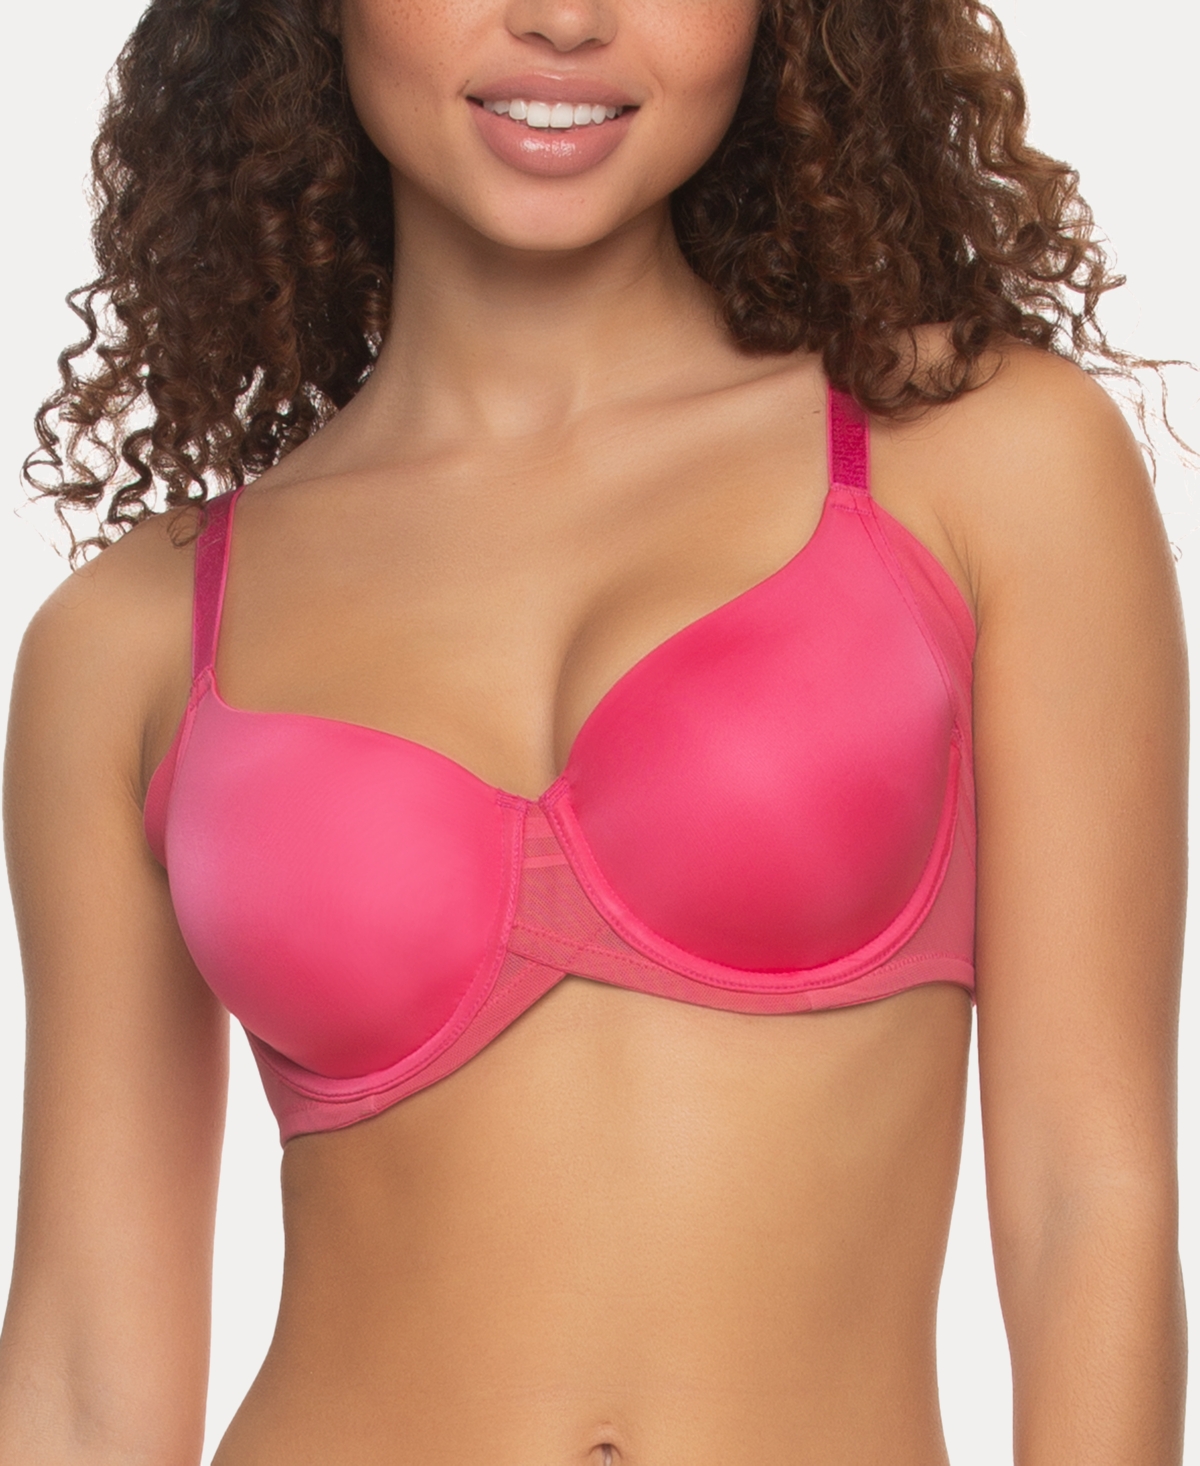 Paramour Paramour Gorgeous Women's T-shirt Bra with Lace Trim - Macy's